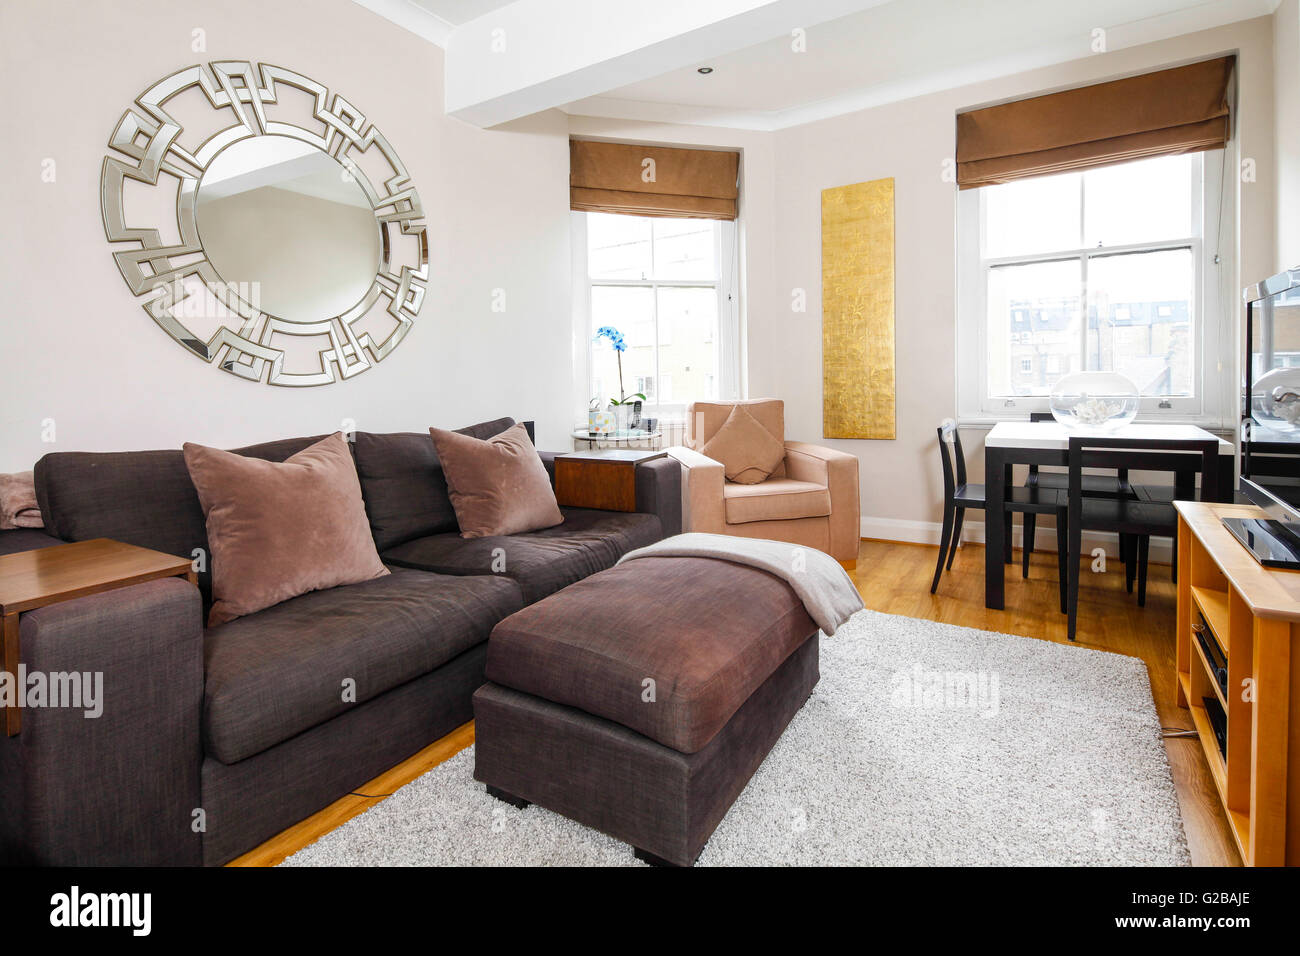 Park House, Harrington Road. Modern clean open plan living and dining room. Mirror hanging above couch. Stock Photo